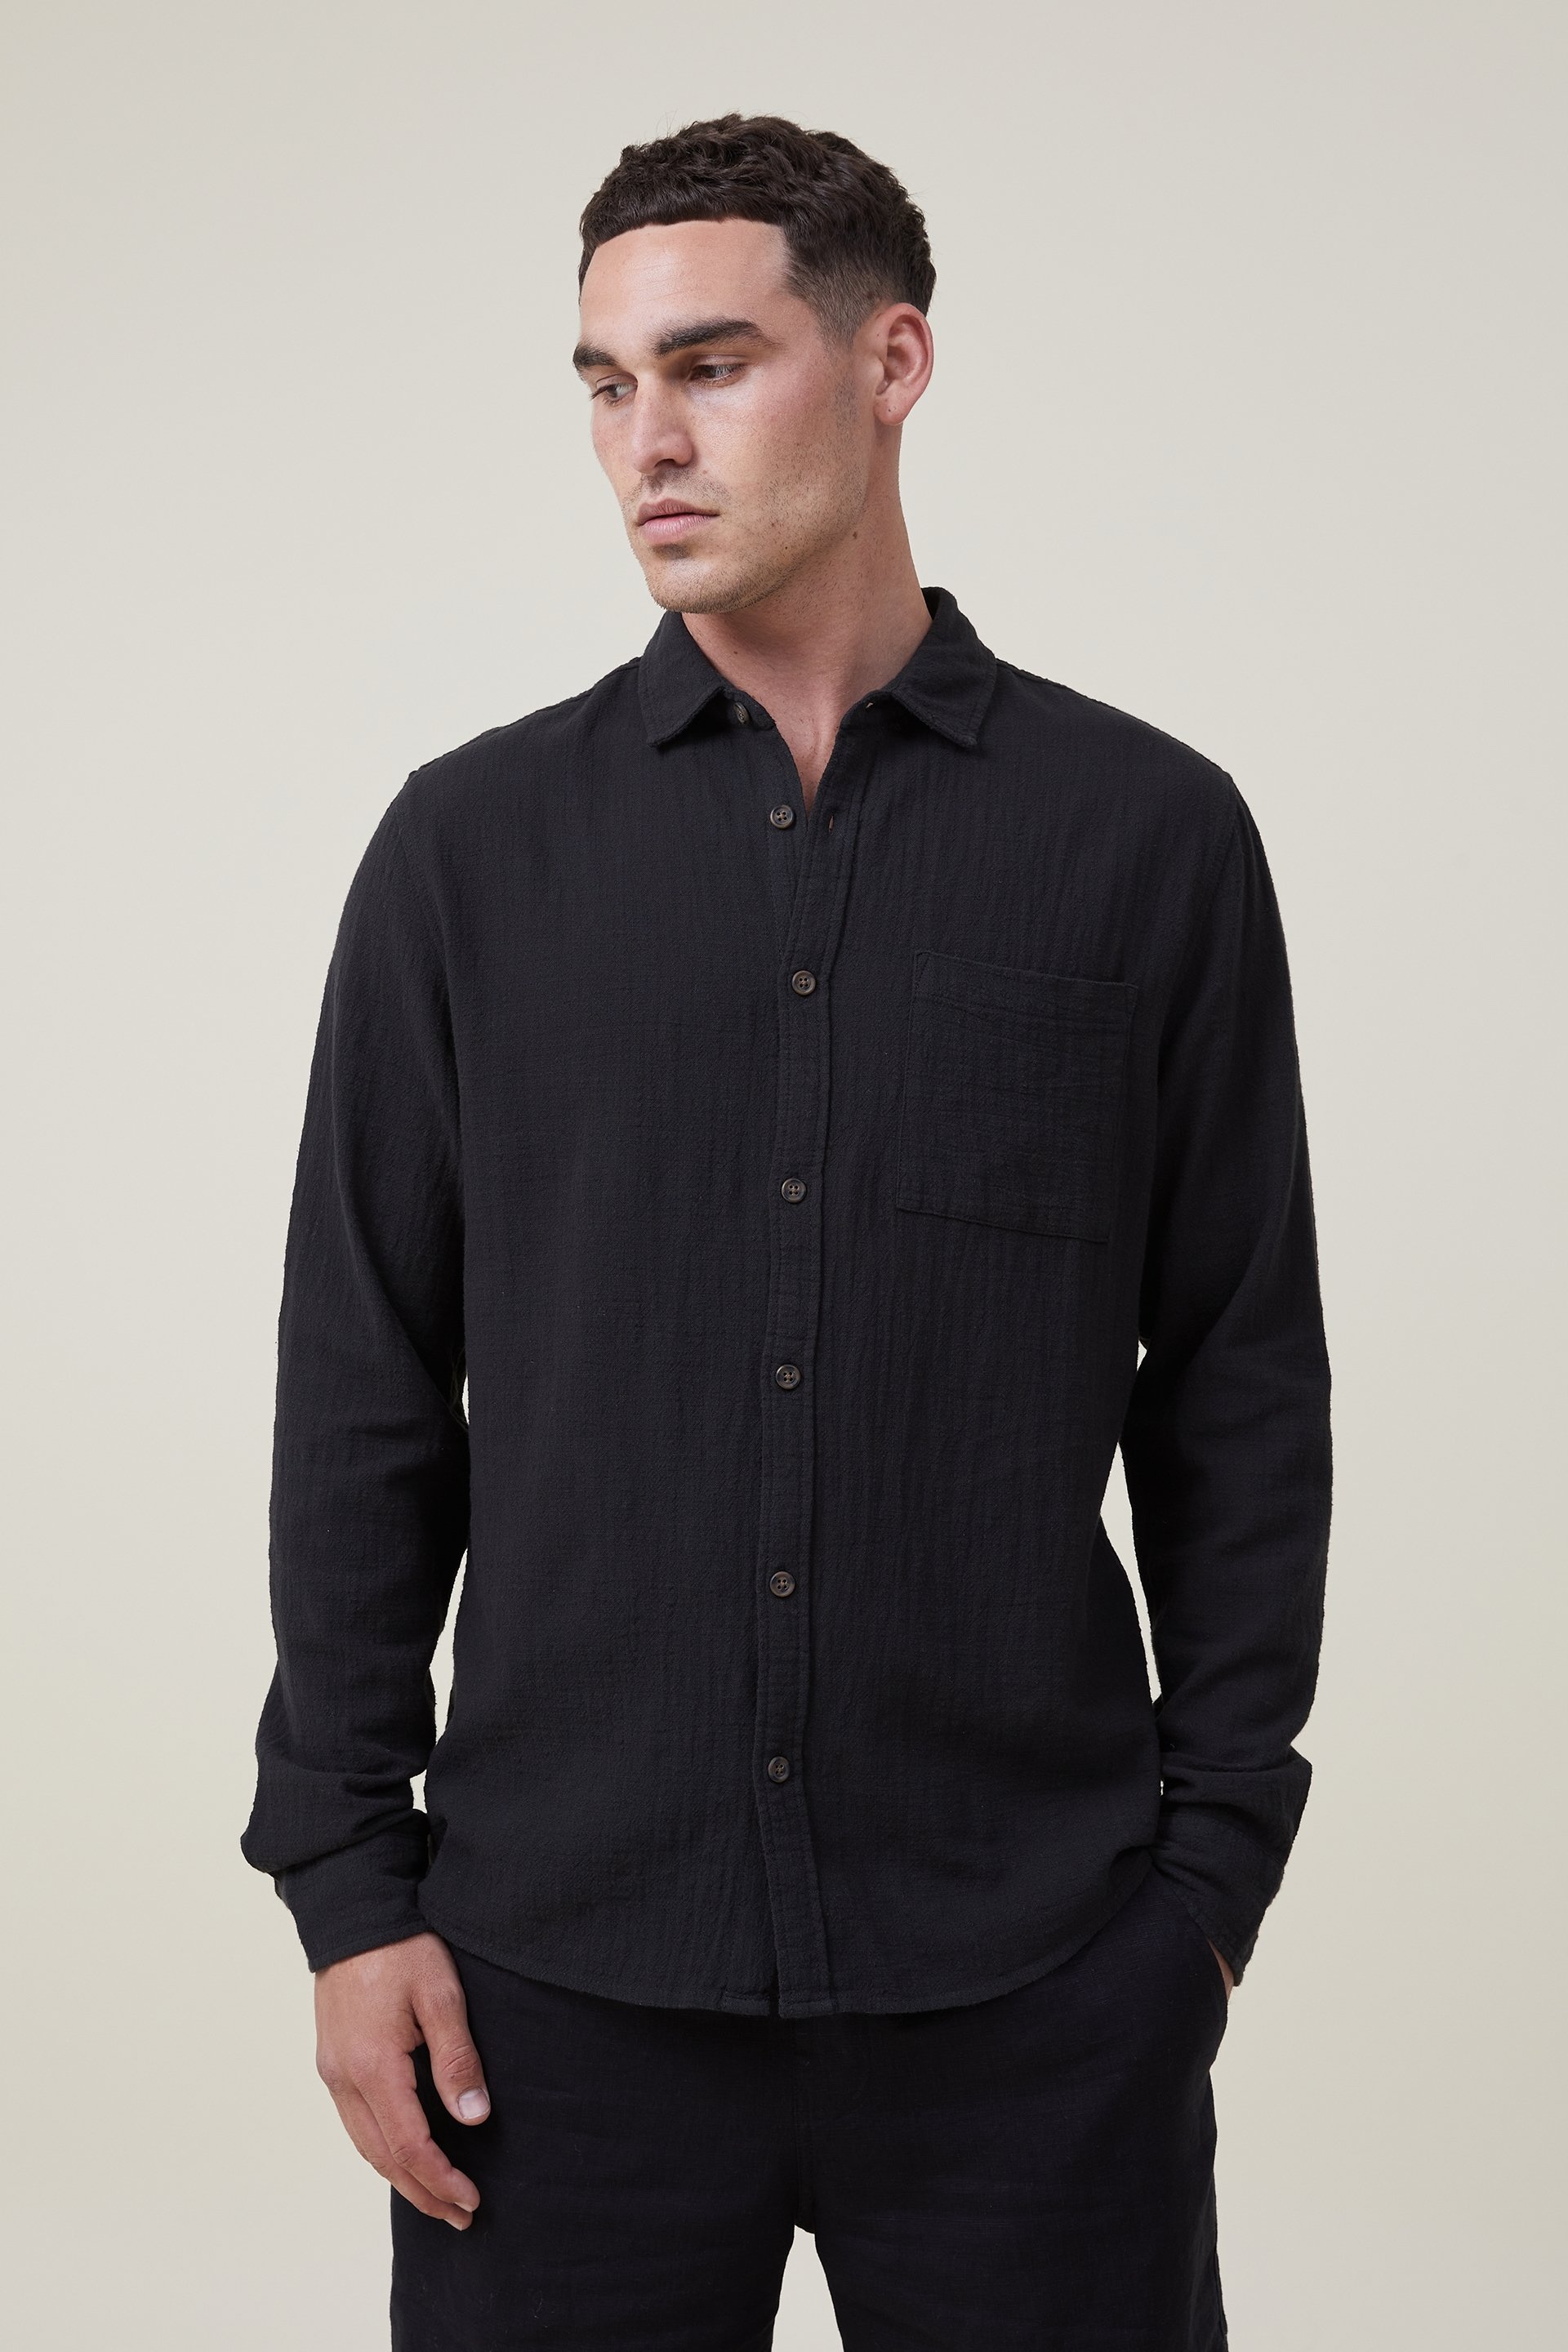 Cotton On Men - Portland Long Sleeve Shirt - Washed black cheesecloth